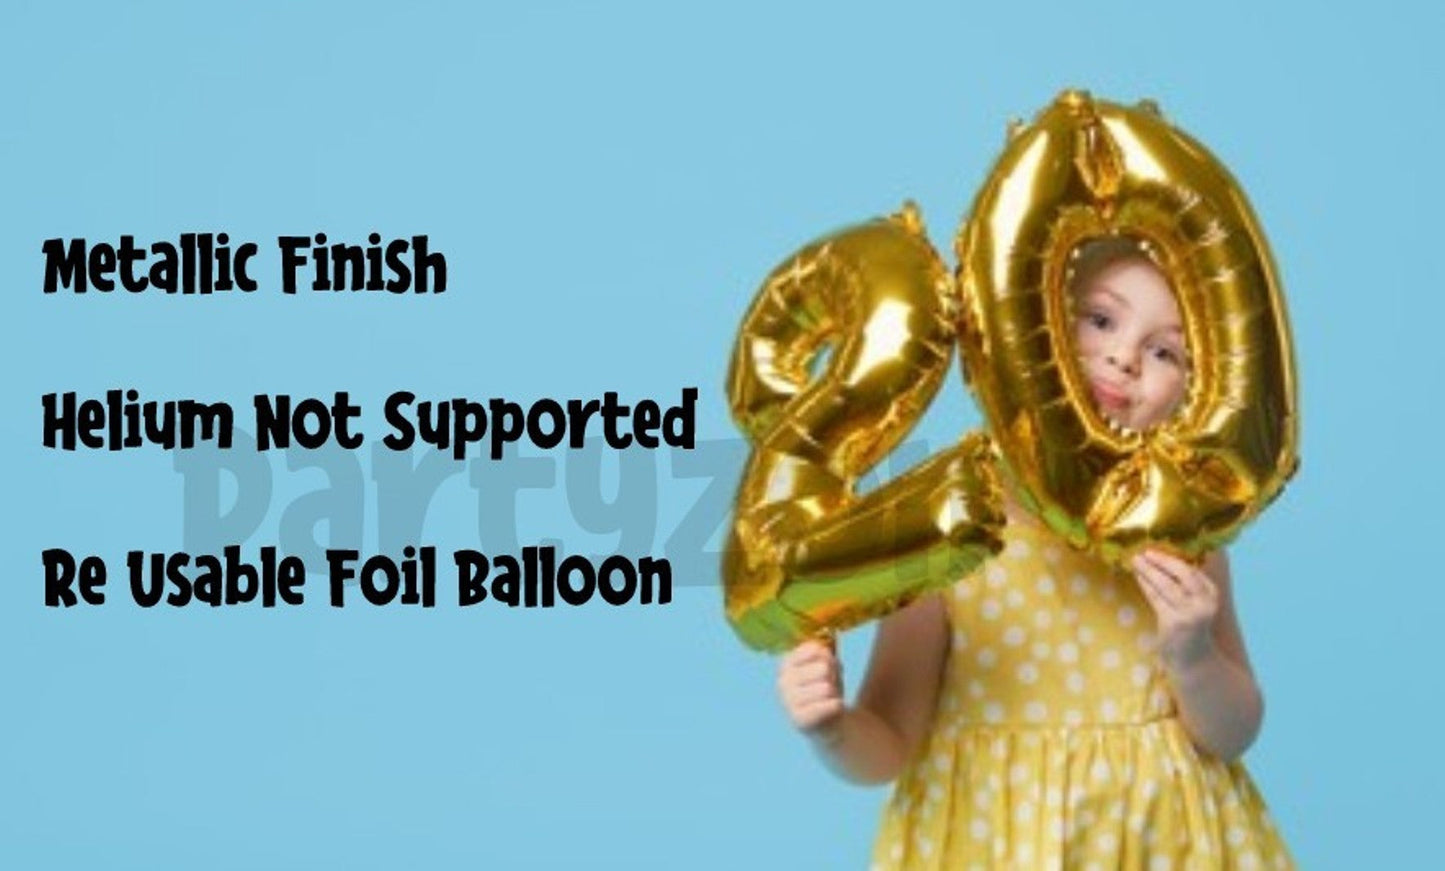 Number 9 Gold Foil Balloon 16 Inches - Balloonistics